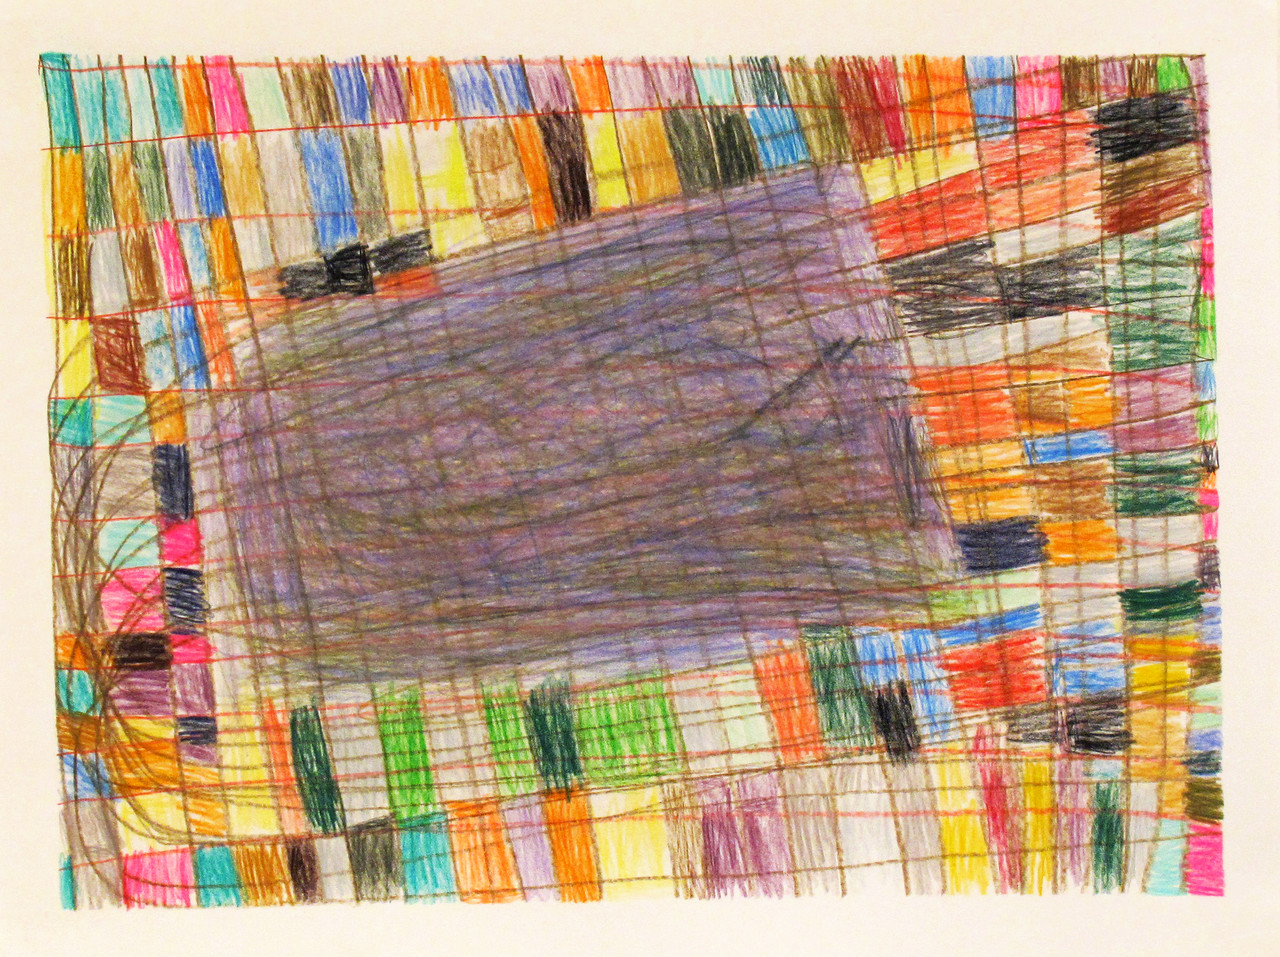 Untitled, 1988, Colored pencil and graphite on paper, 38.7 x 47 cm, BS 010